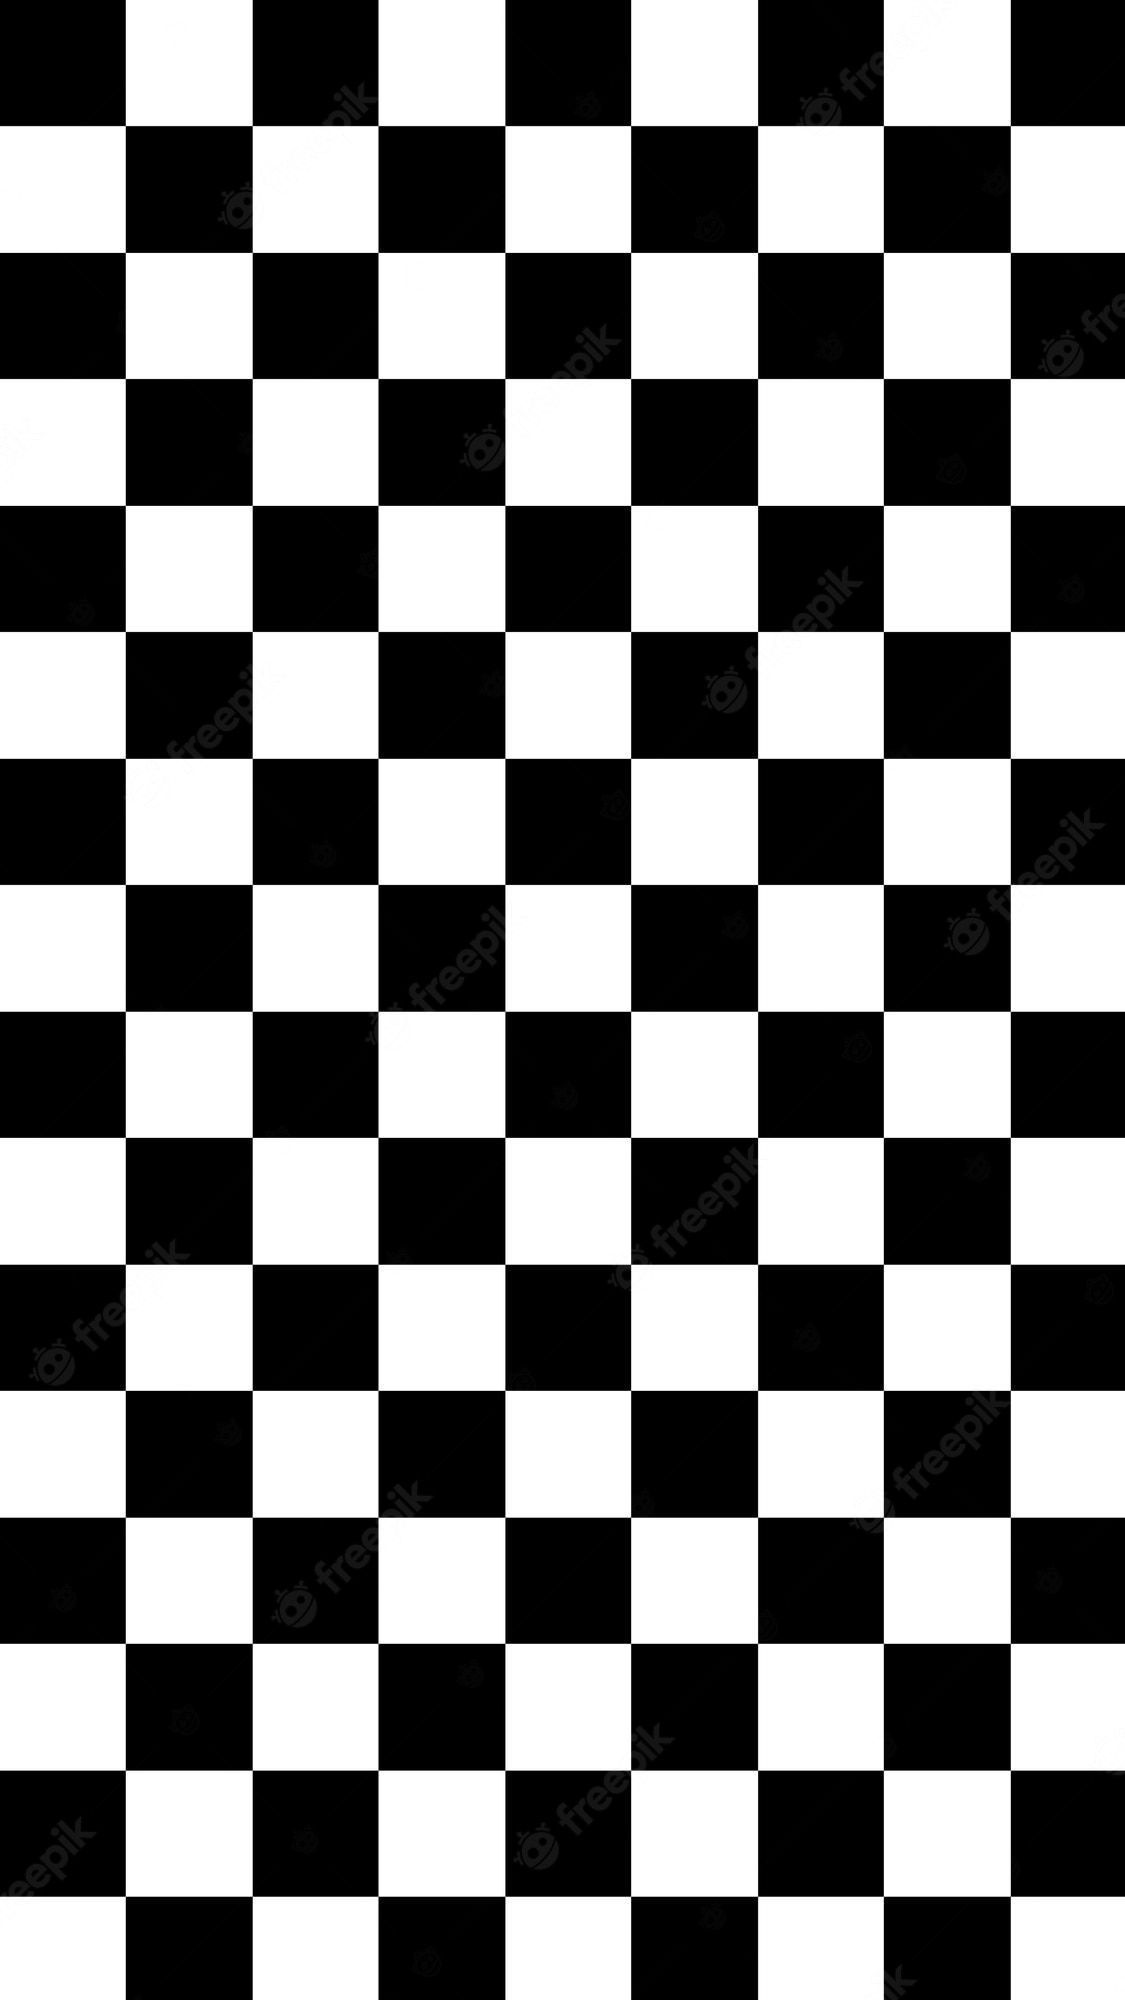 A black and white checkered pattern - Cute white, black and white, checkered